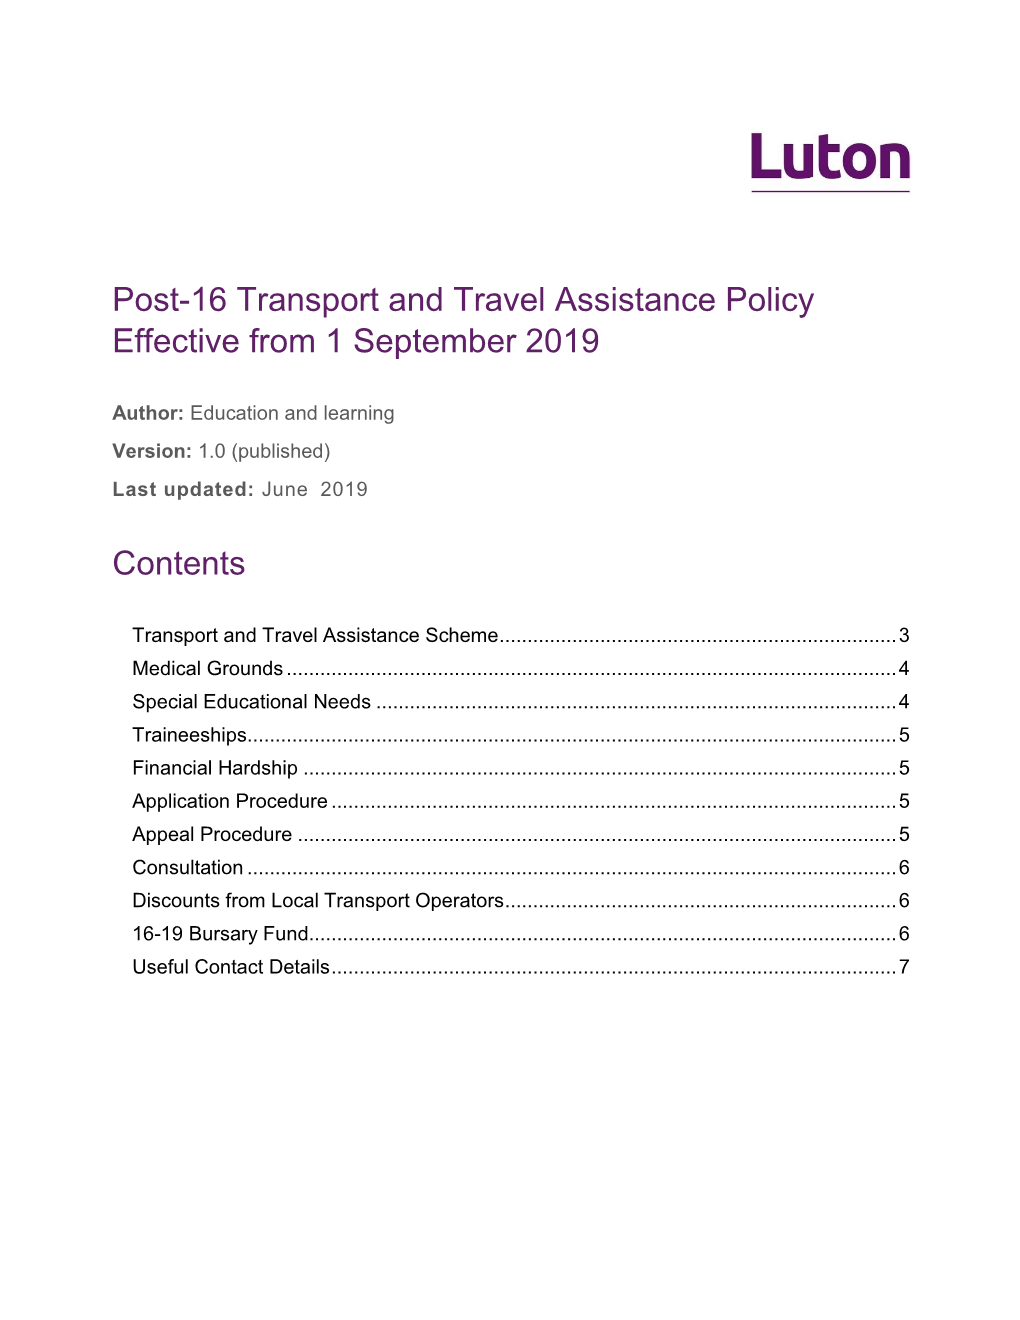 Transport and Travel Assistance Policy Effective from 1 September 2019